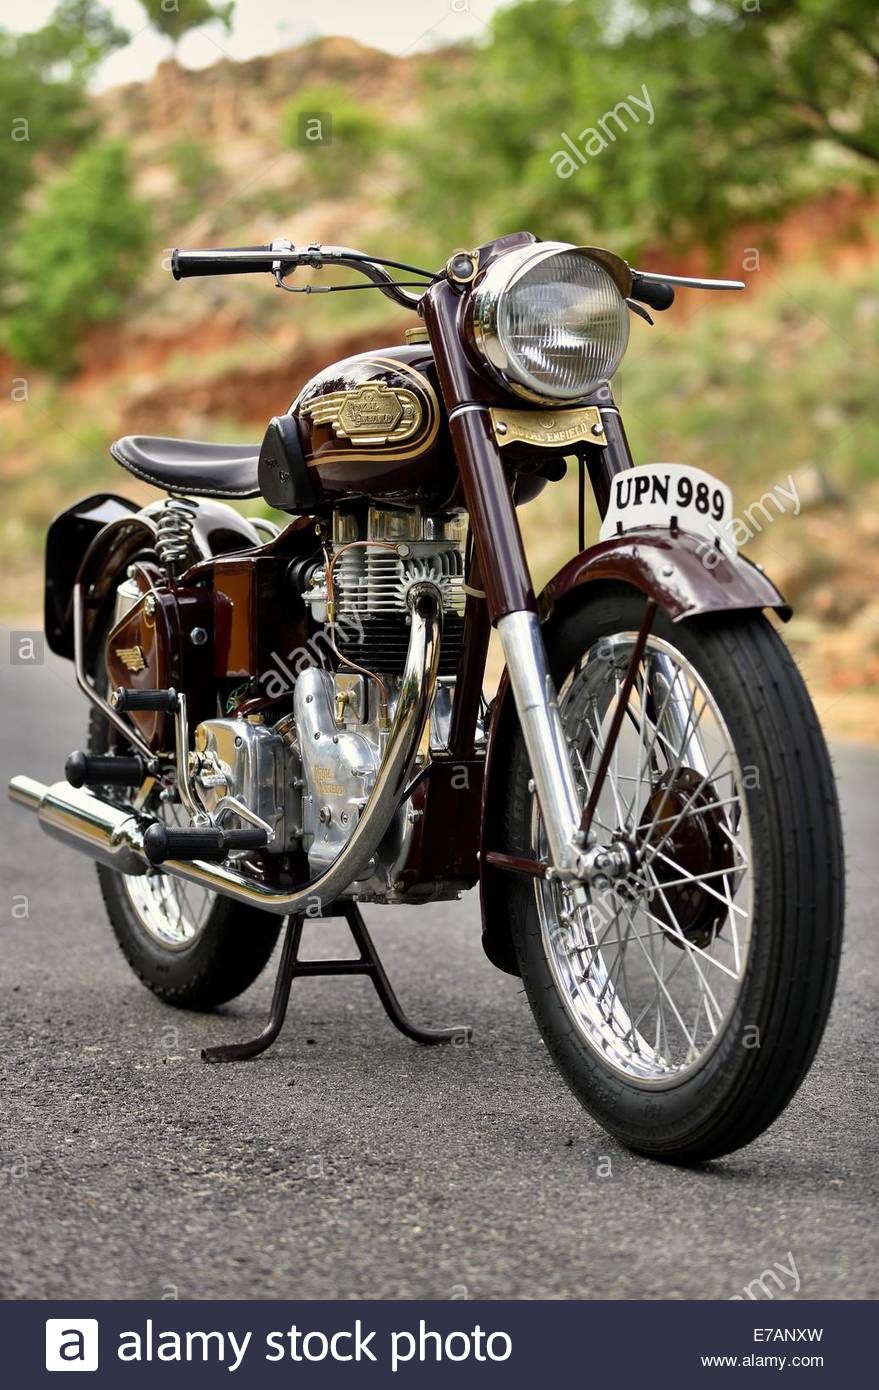 royal-enfield-bullet-350-cc-g2-1954-made-in-england-in-india-E7ANXW.jpg